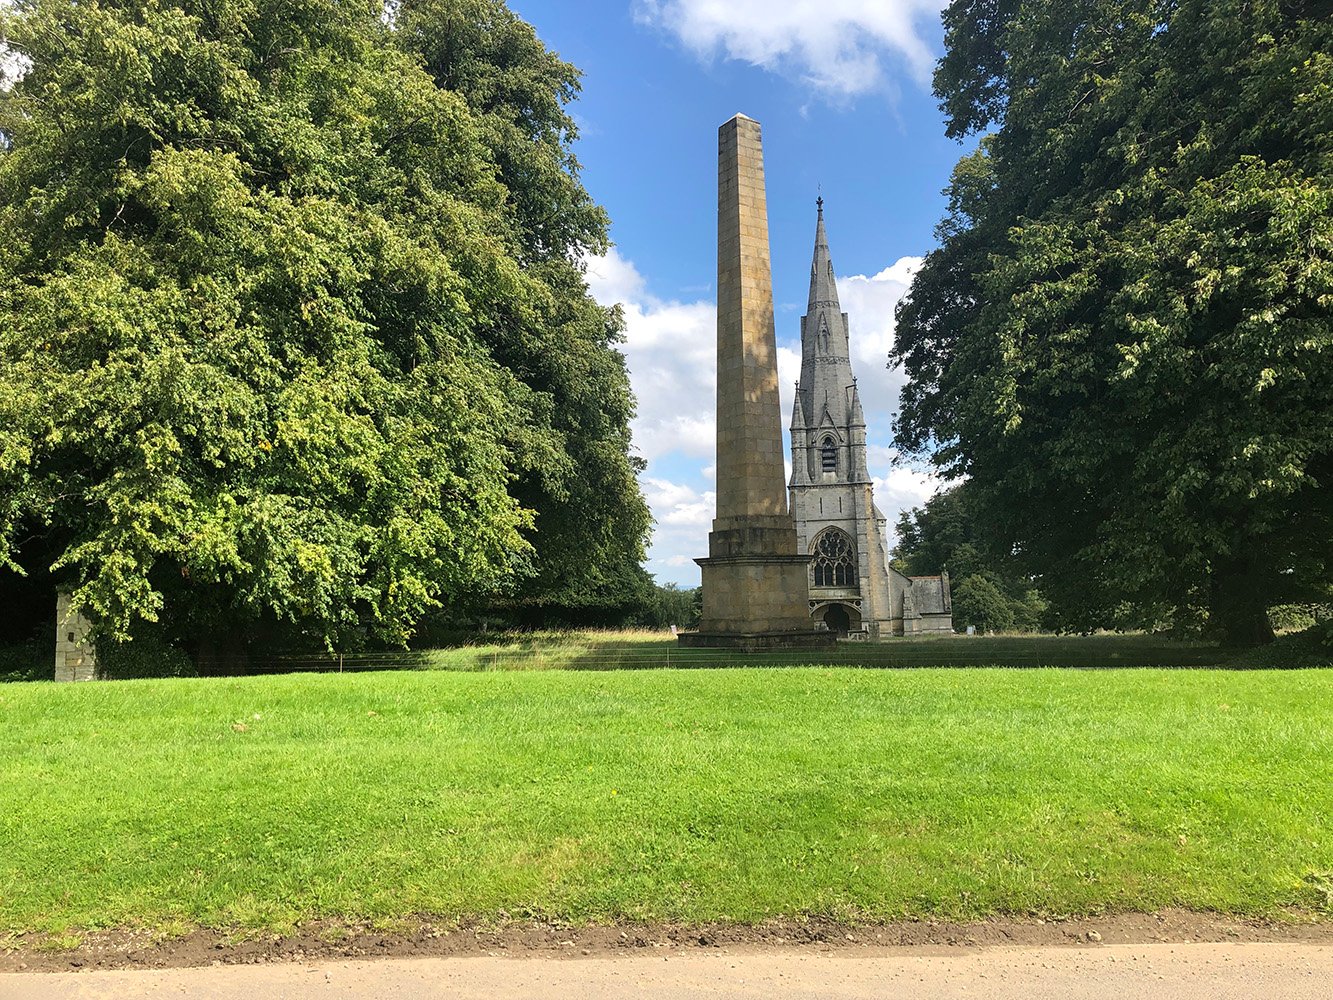 Image name obelisk and church studley royal fountains abbey north yorkshire the 9 image from the post A look at the history of Studley Royal, North Yorkshire, with Dr Emma Wells in Yorkshire.com.